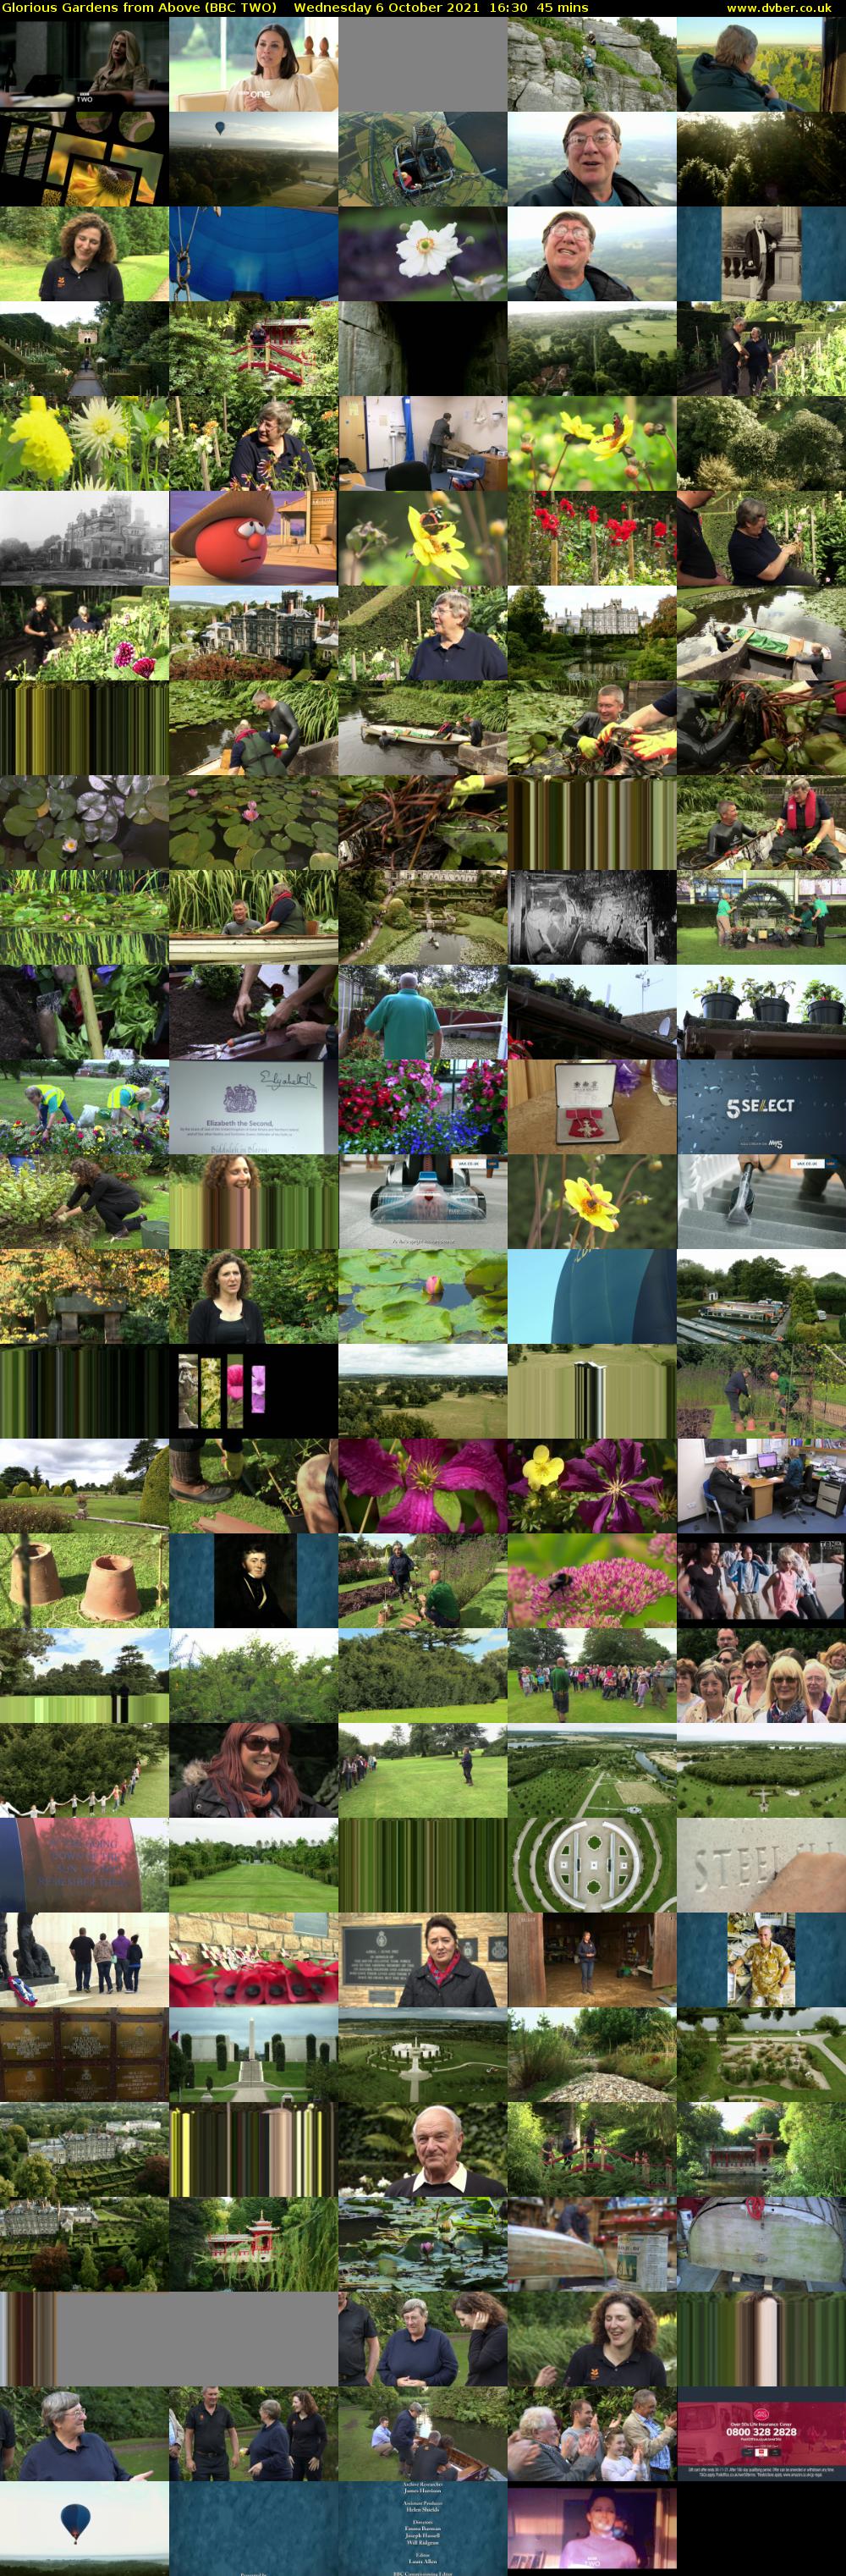 Glorious Gardens from Above (BBC TWO) Wednesday 6 October 2021 16:30 - 17:15